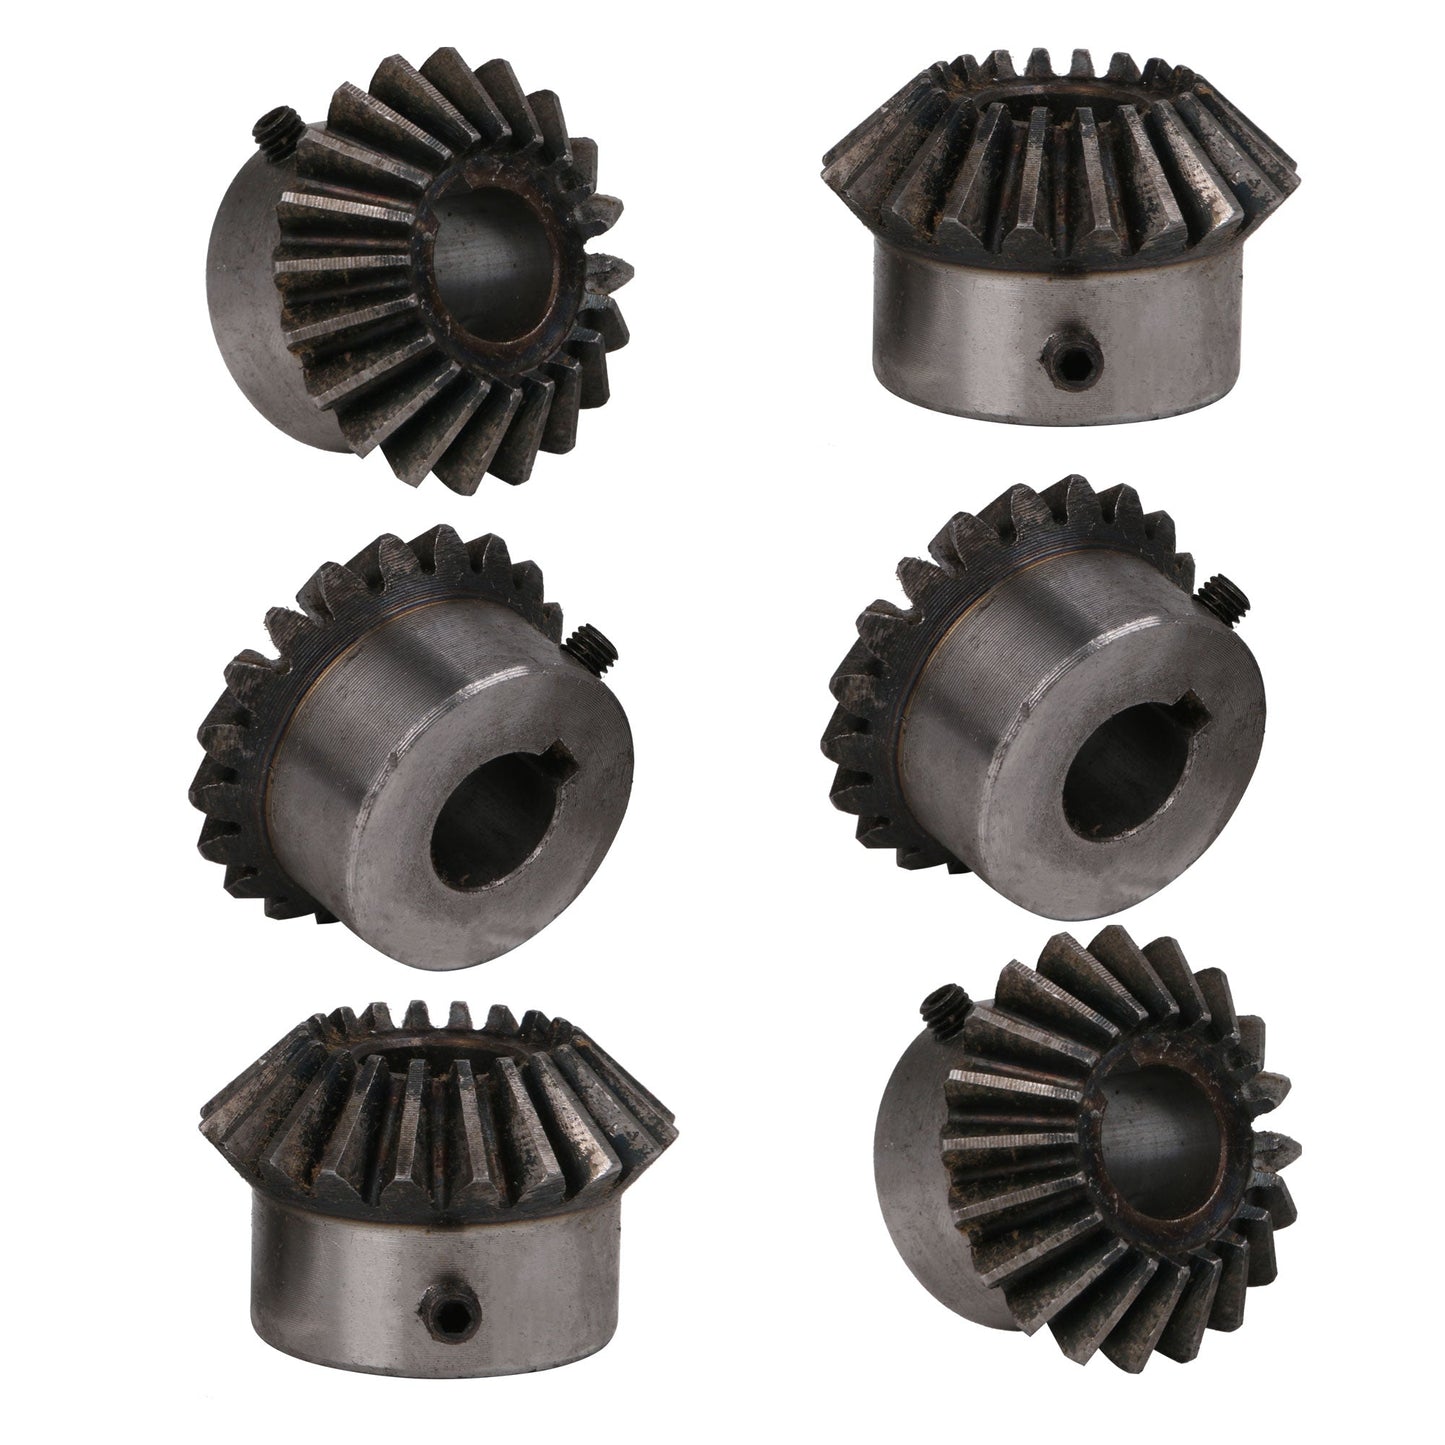 BQLZR Tapered Bevel Gear Wheel 2 Modulus 20 T 0.55inch for DIY Motor Driving Pack of 6